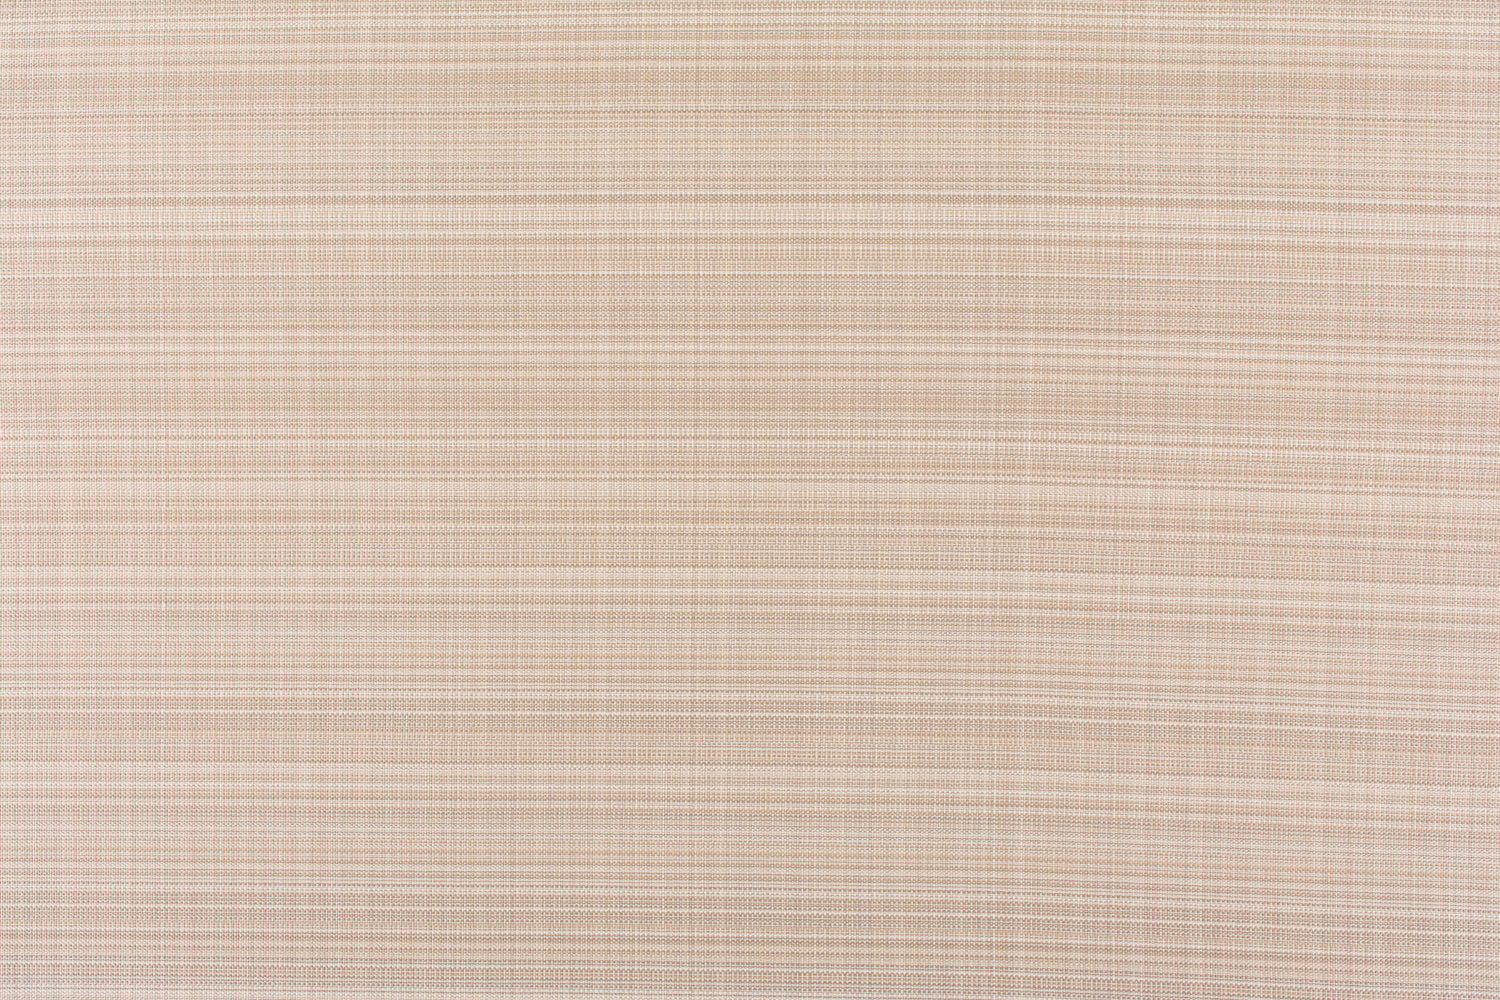 Jettier Beach fabric in dune color - pattern number WR 00052873 - by Scalamandre in the Old World Weavers collection